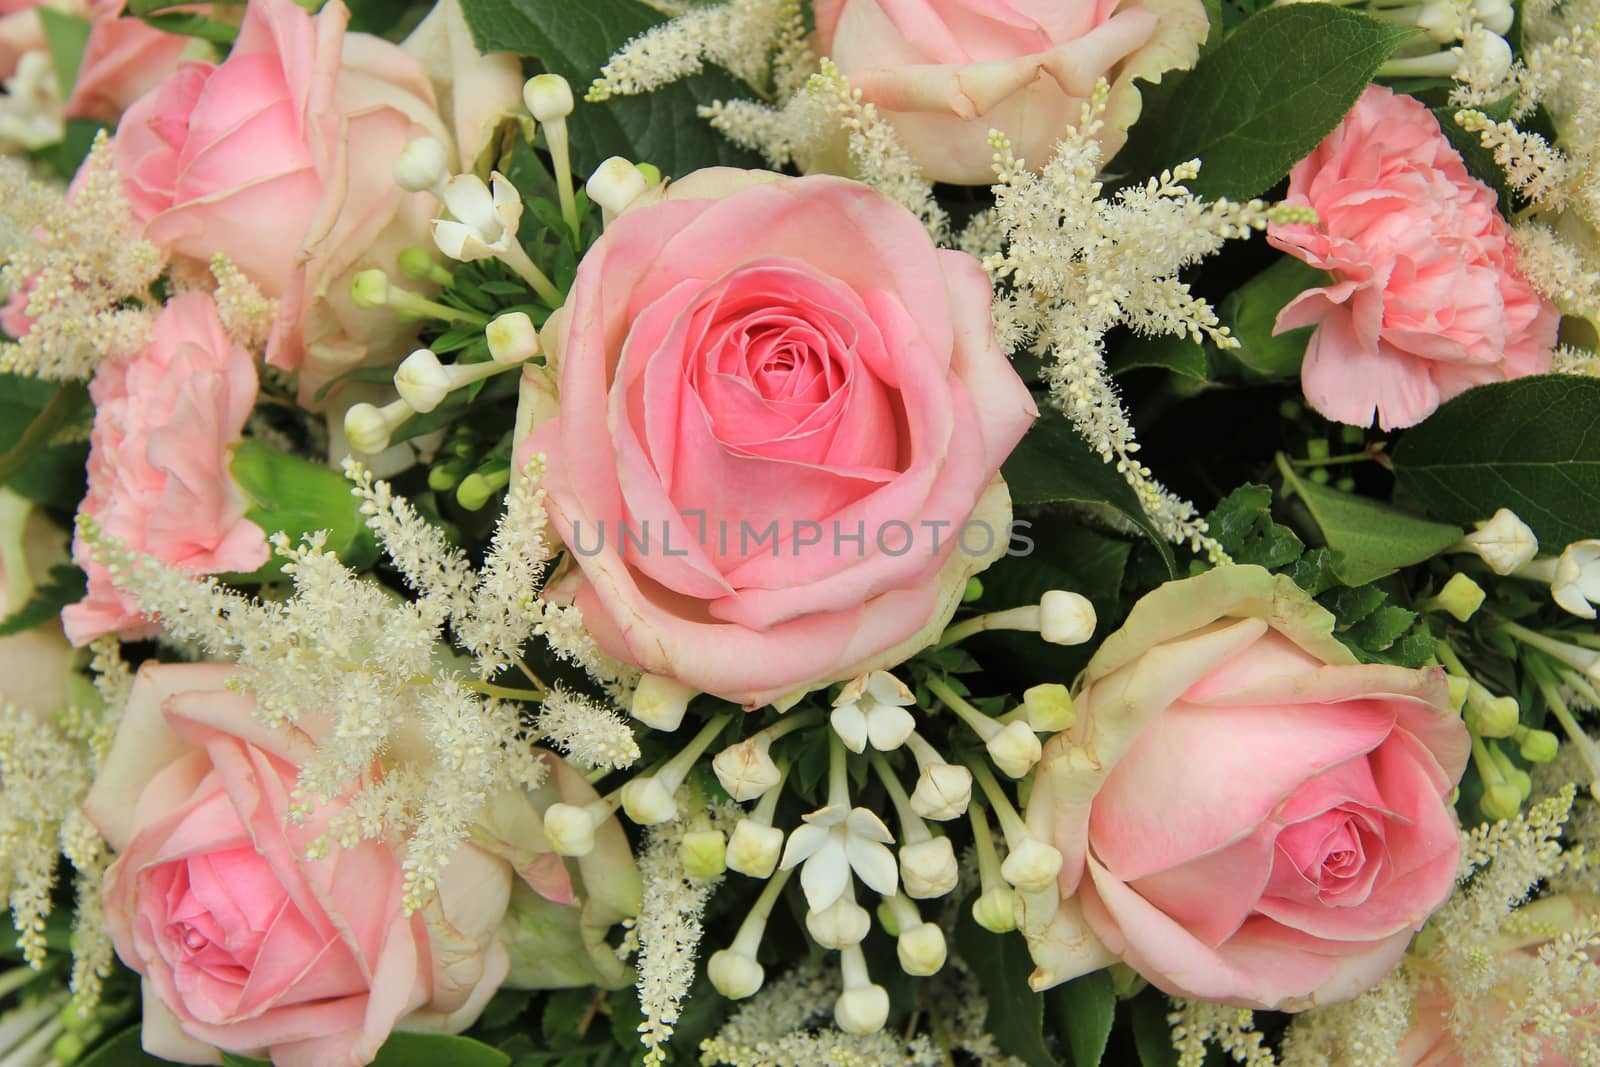 Pink roses and stephanotis in bridal bouquet by studioportosabbia